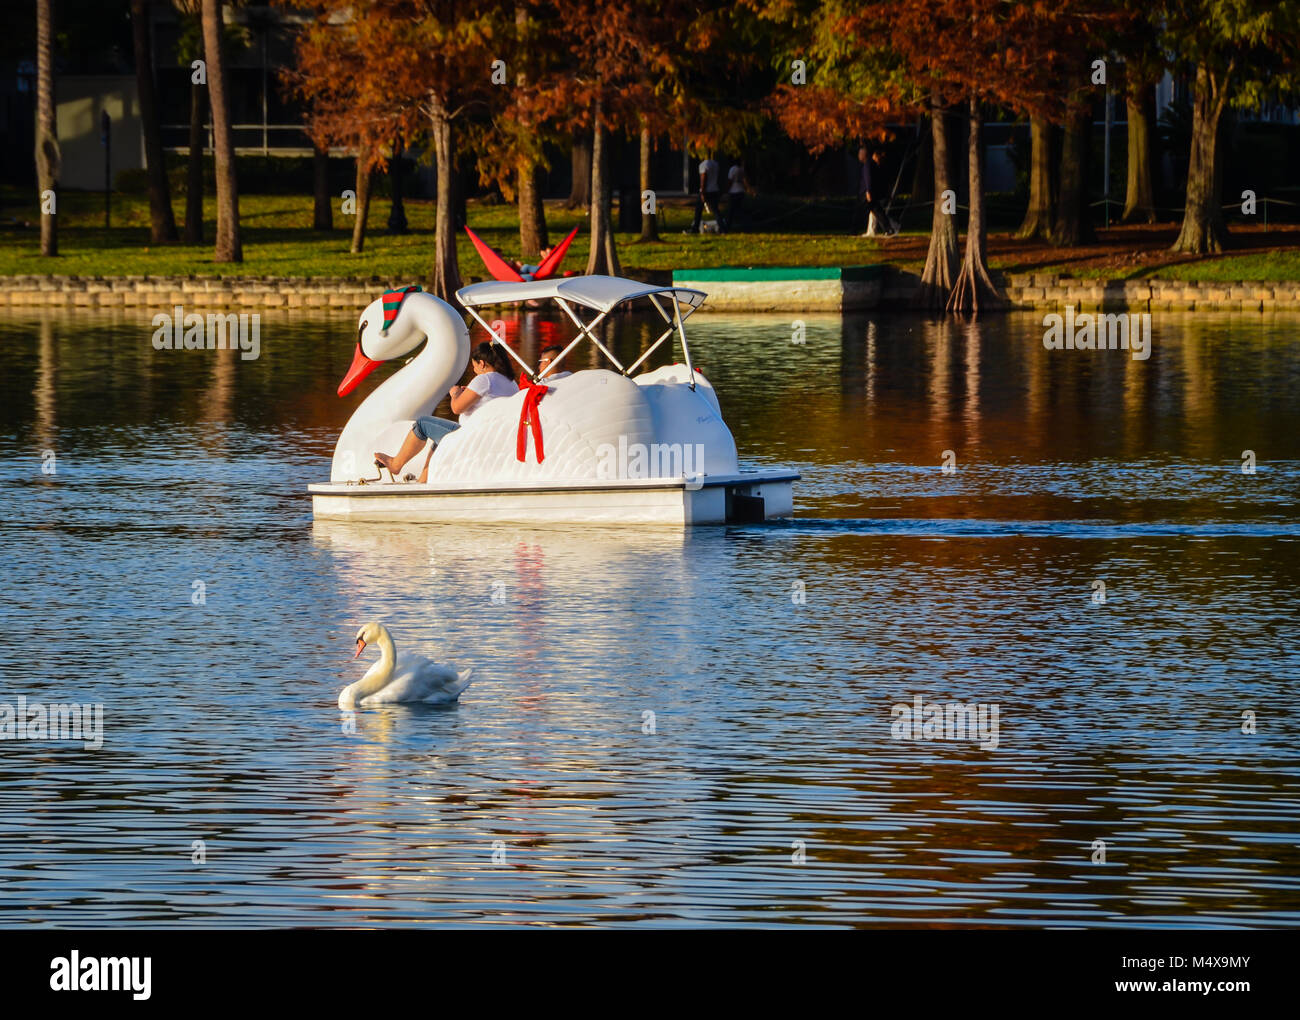 Lake Eola Park, Orlando, Florida. White Swan boat ride adorned for the holidays with red ribbons. Stock Photo